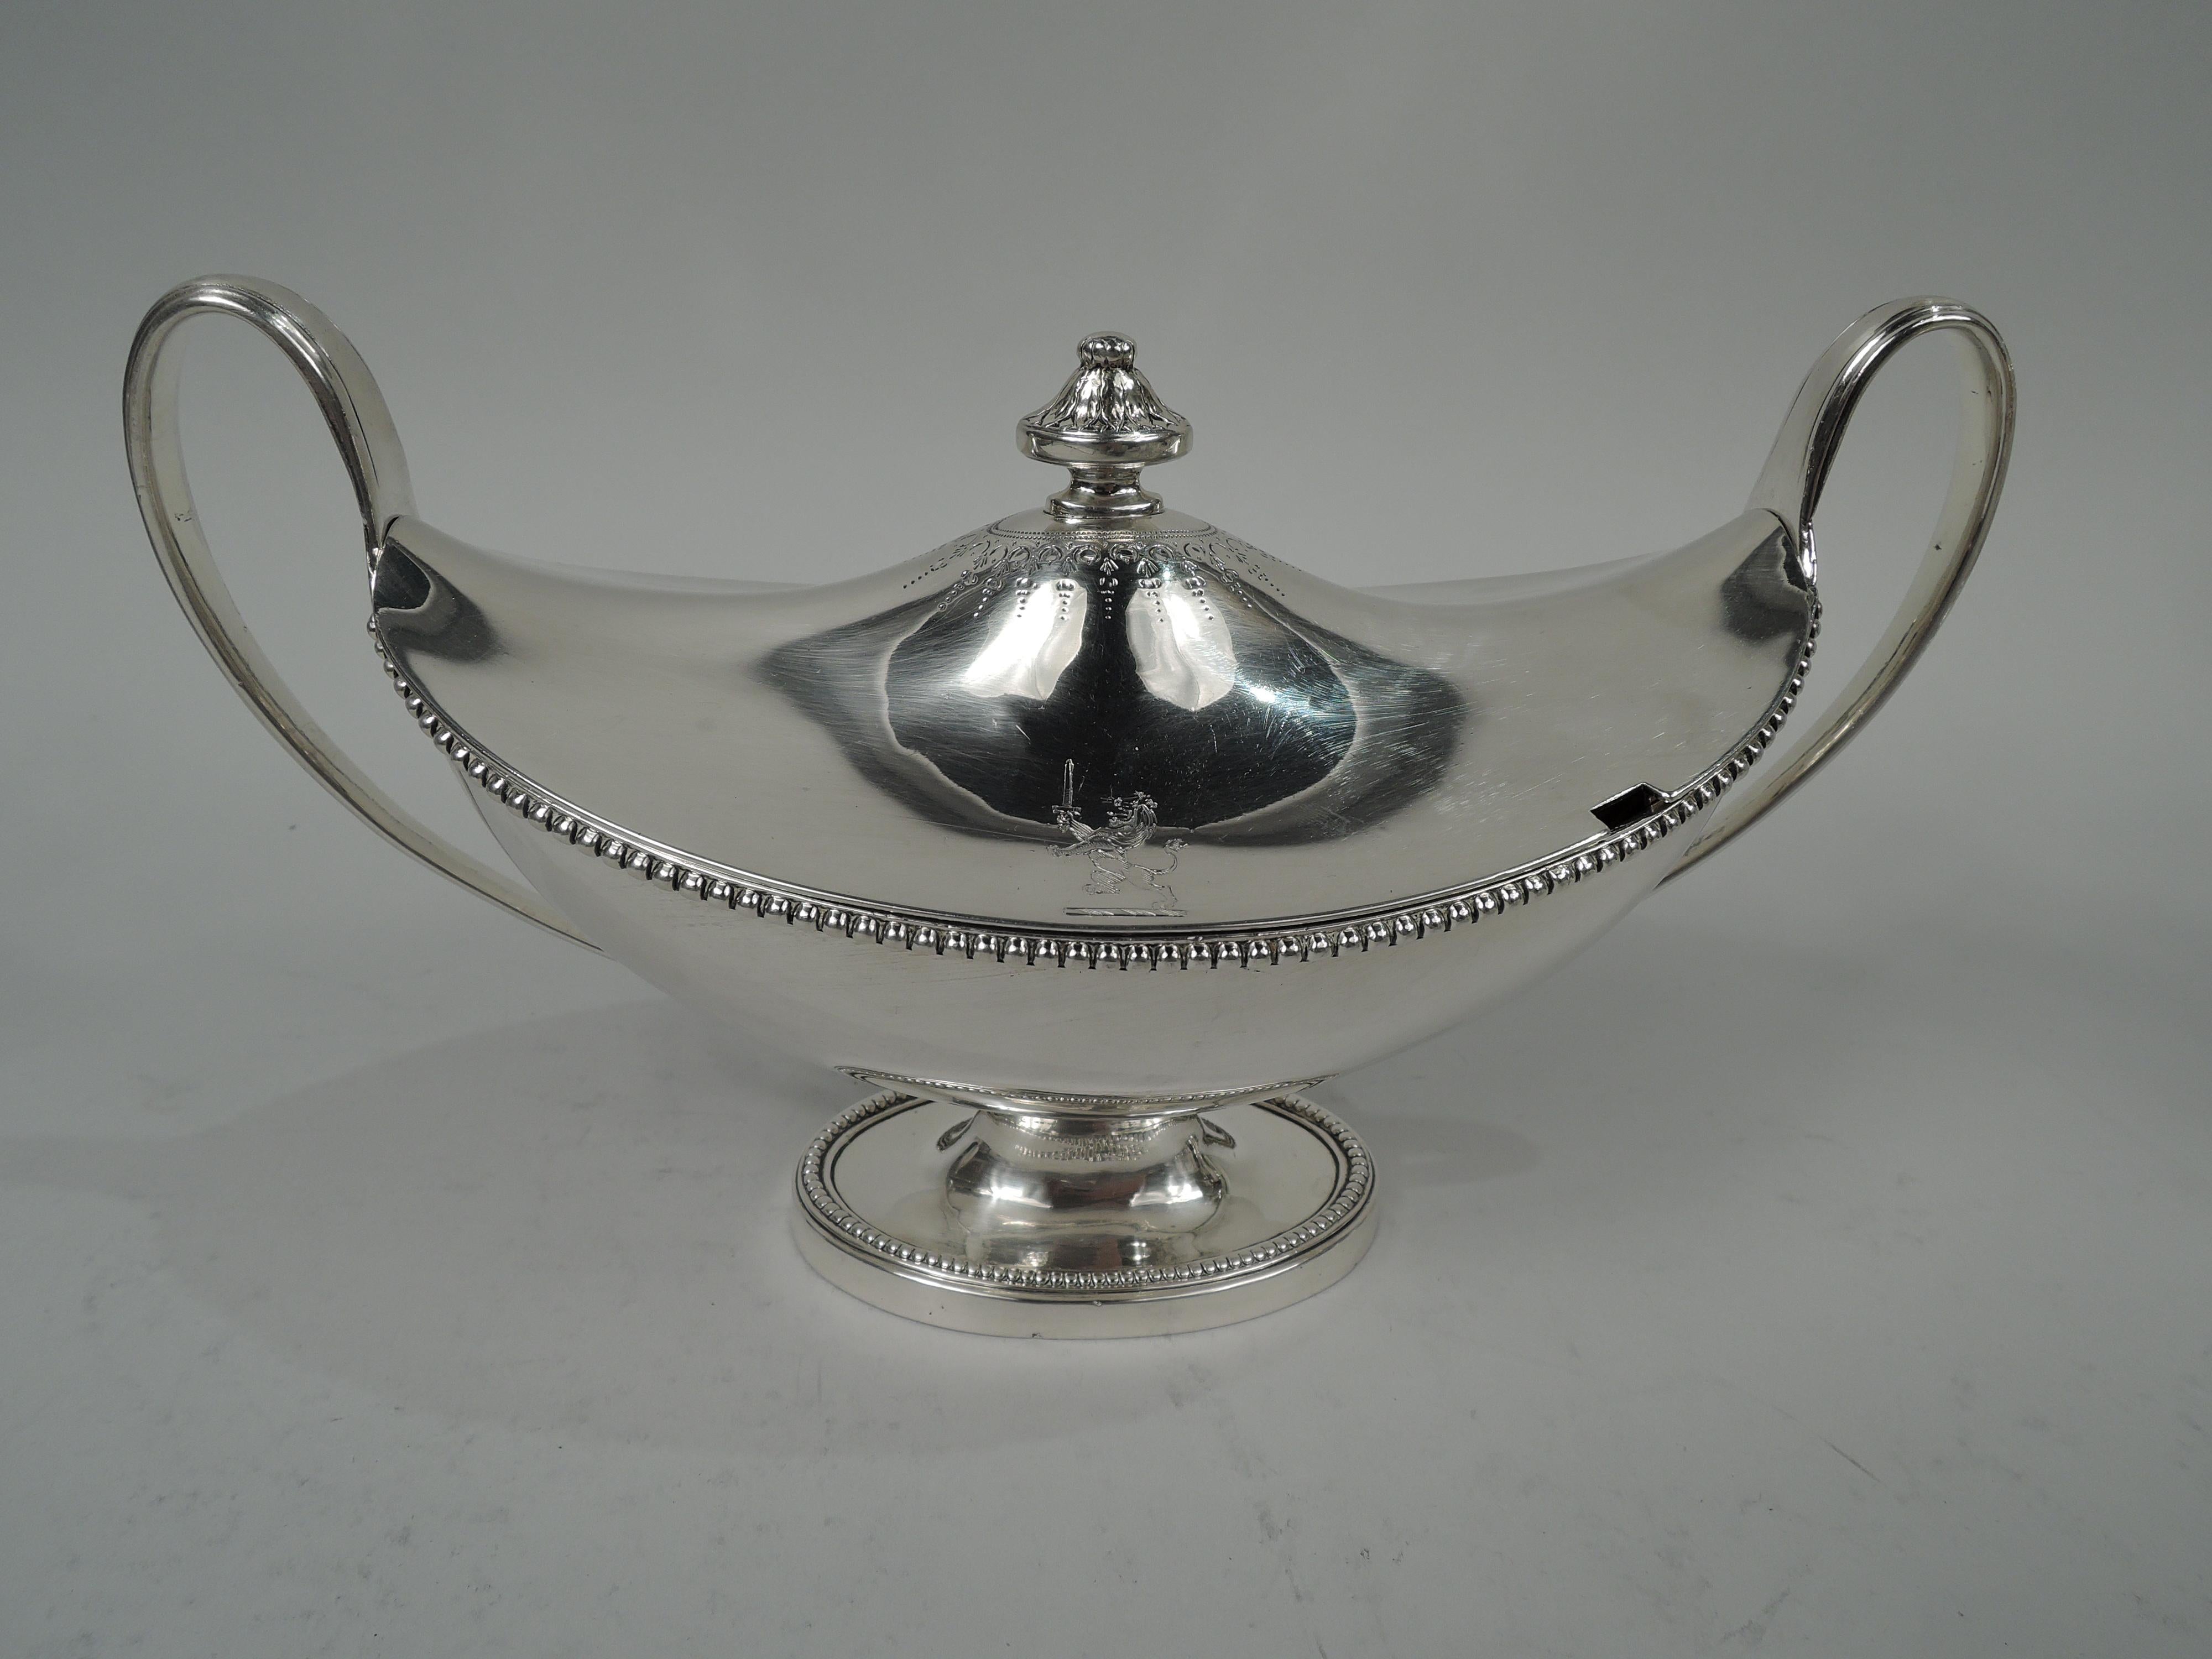 Pair of George III sterling silver tureens. Made by William Pitts in London in 1785. Each: Ovoid body with upturned ends on oval foot; high looping tapering and leaf-mounted end handles. Cover raised with leaf-capped vasiform finial in pointille and